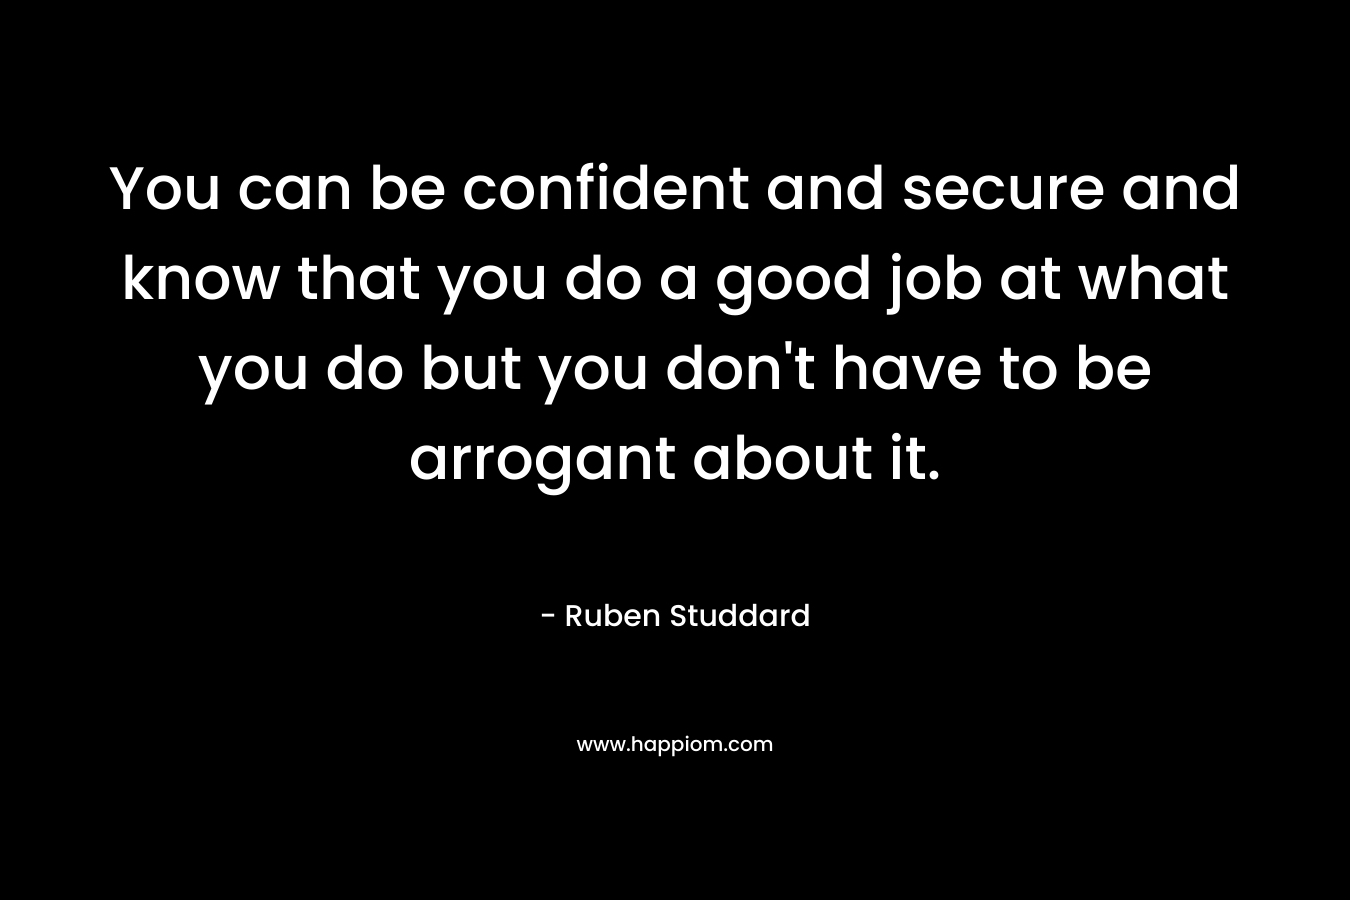 You can be confident and secure and know that you do a good job at what you do but you don’t have to be arrogant about it. – Ruben Studdard